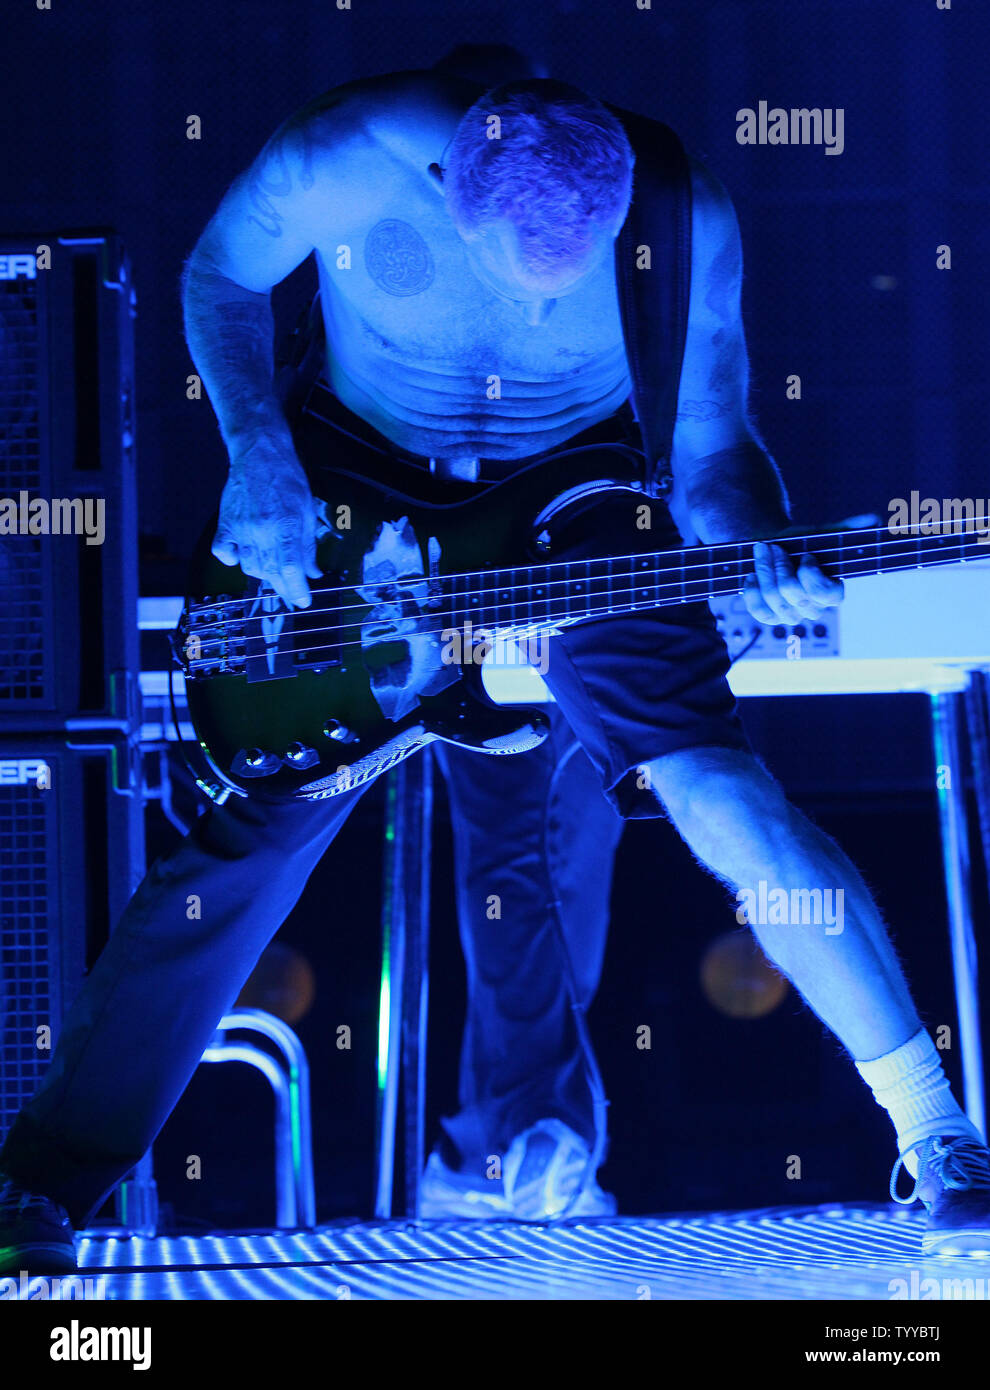 Flea, whose real name is Michael Peter Balzary, plays the bass guitar while performing with the Red Hot Chili Peppers in concert at Bercy in Paris on October 18, 2011.   UPI/David Silpa Stock Photo